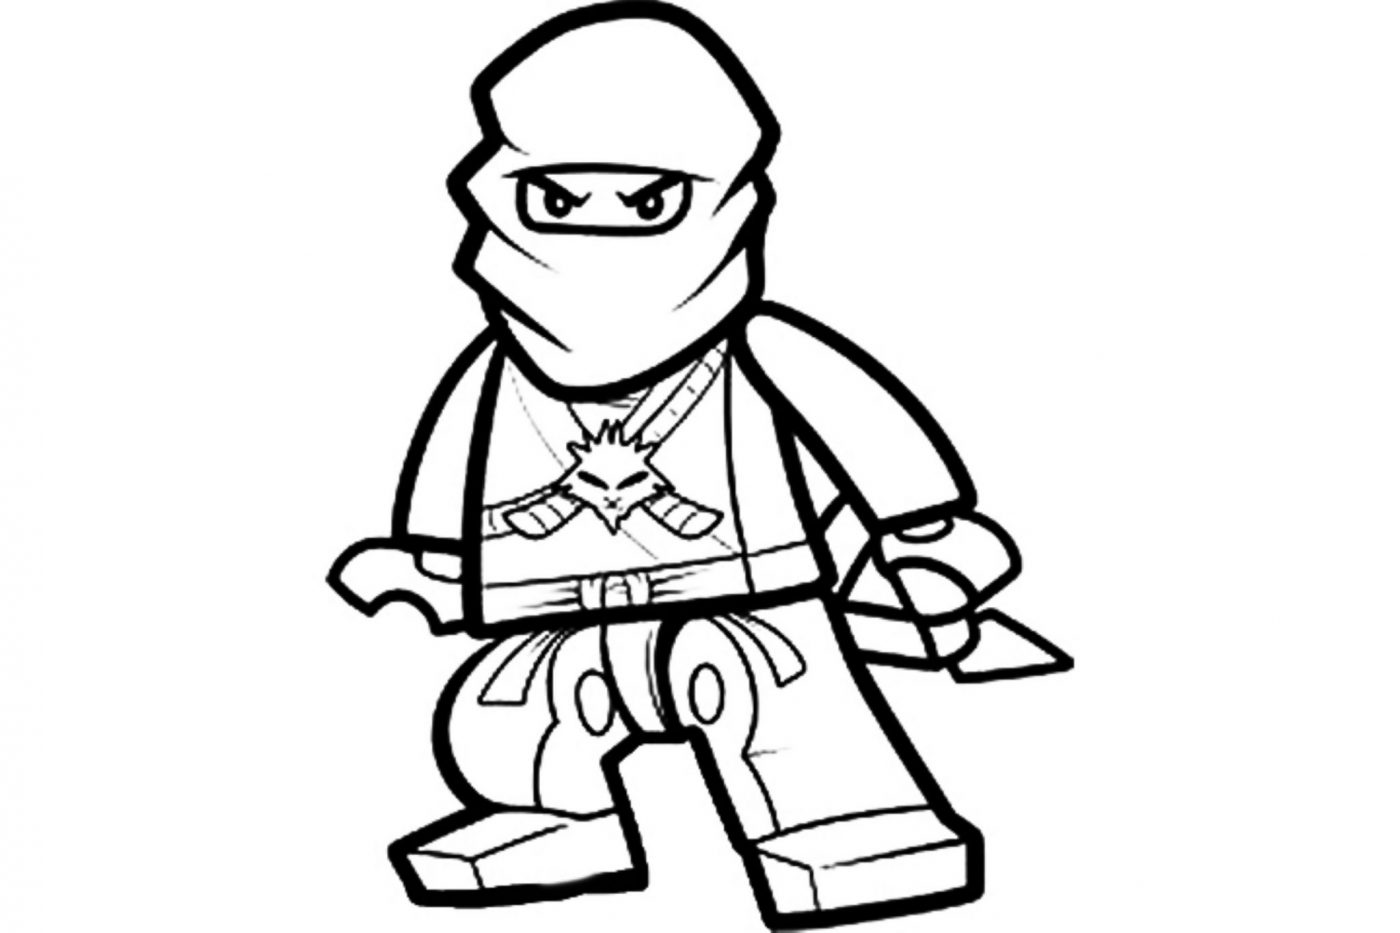 Print & Download - The Attractive Ninja Coloring Pages for Kids Activity